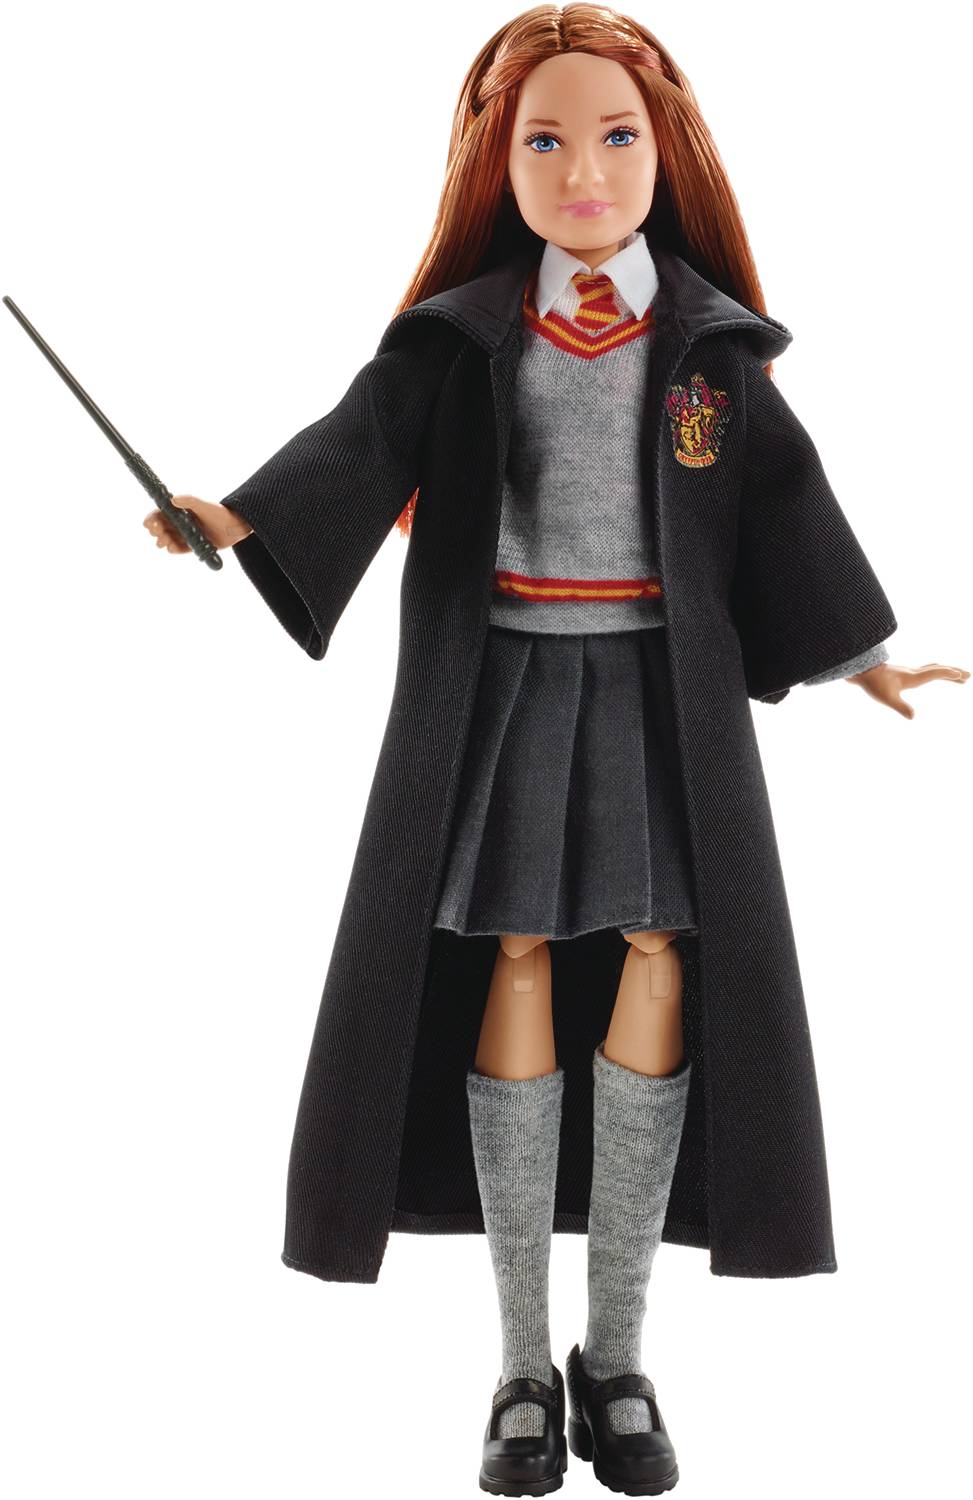 HARRY POTTER COS 7IN SCALE GINNY WEASLEY DOLL